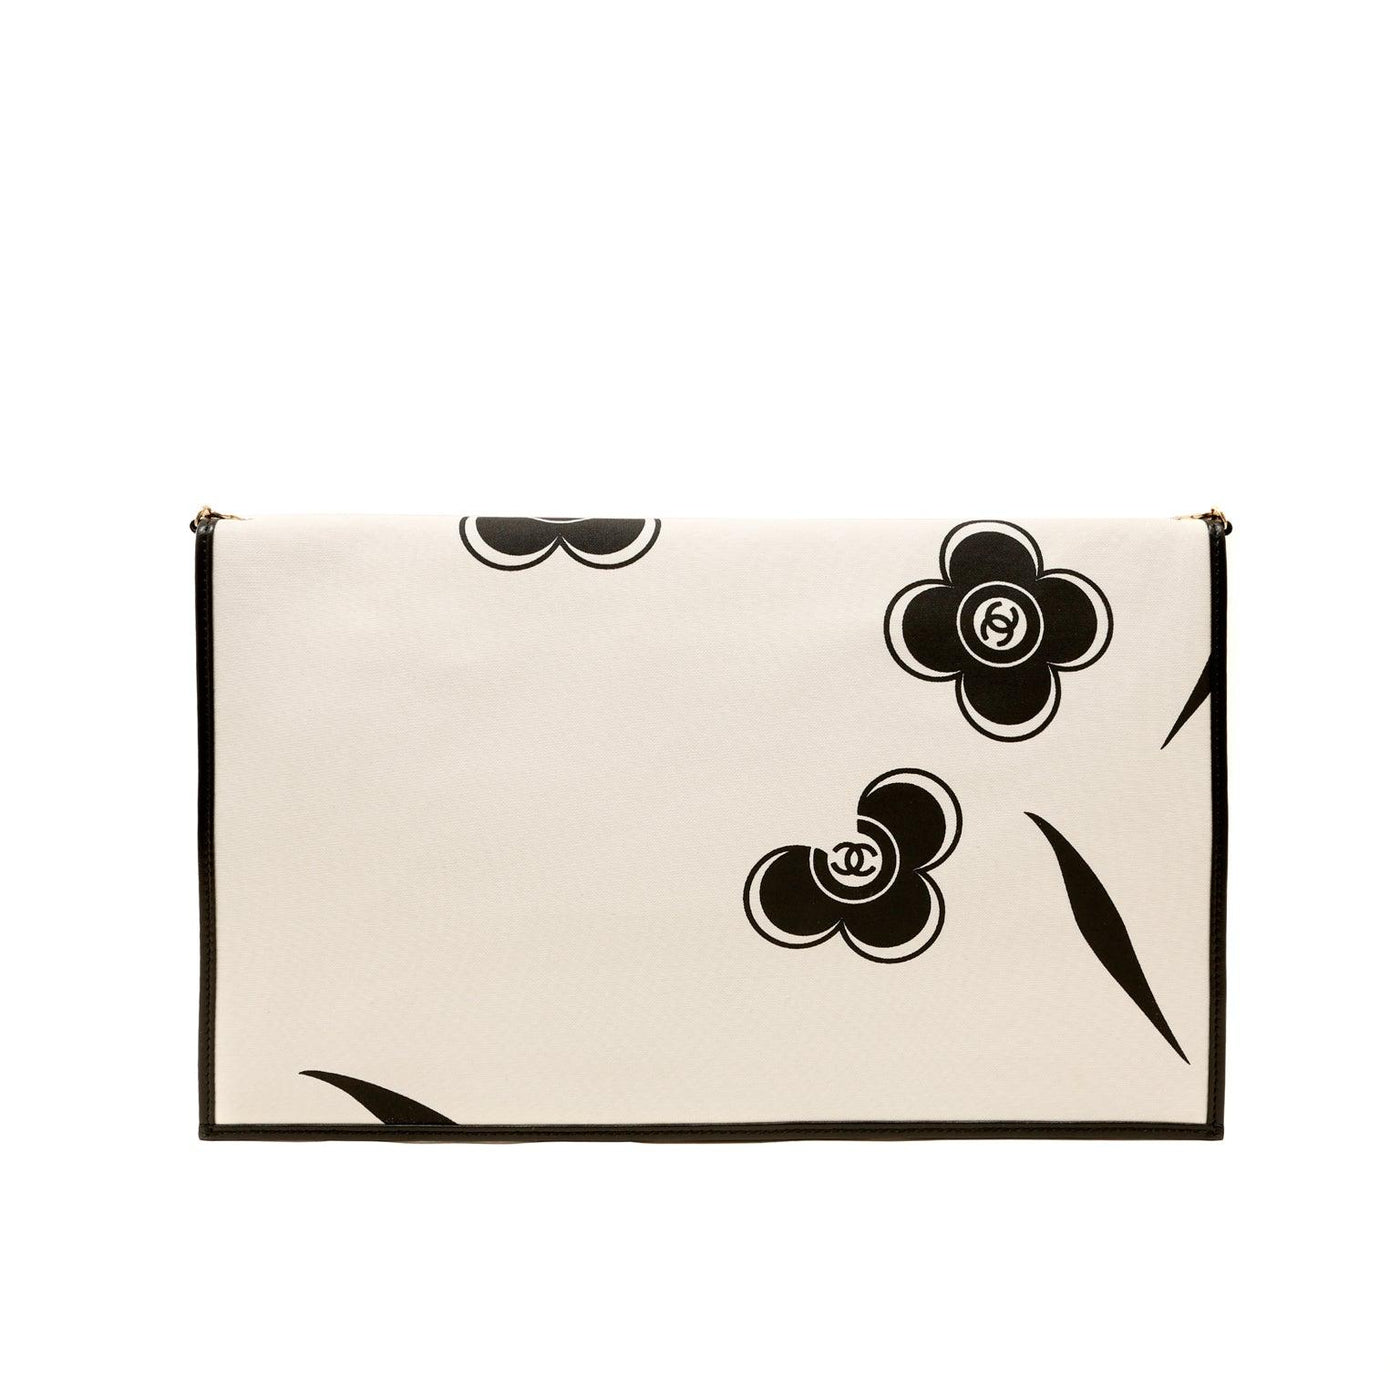 Chanel Ivory and Black Camellia Envelope Clutch with Strap - Only Authentics